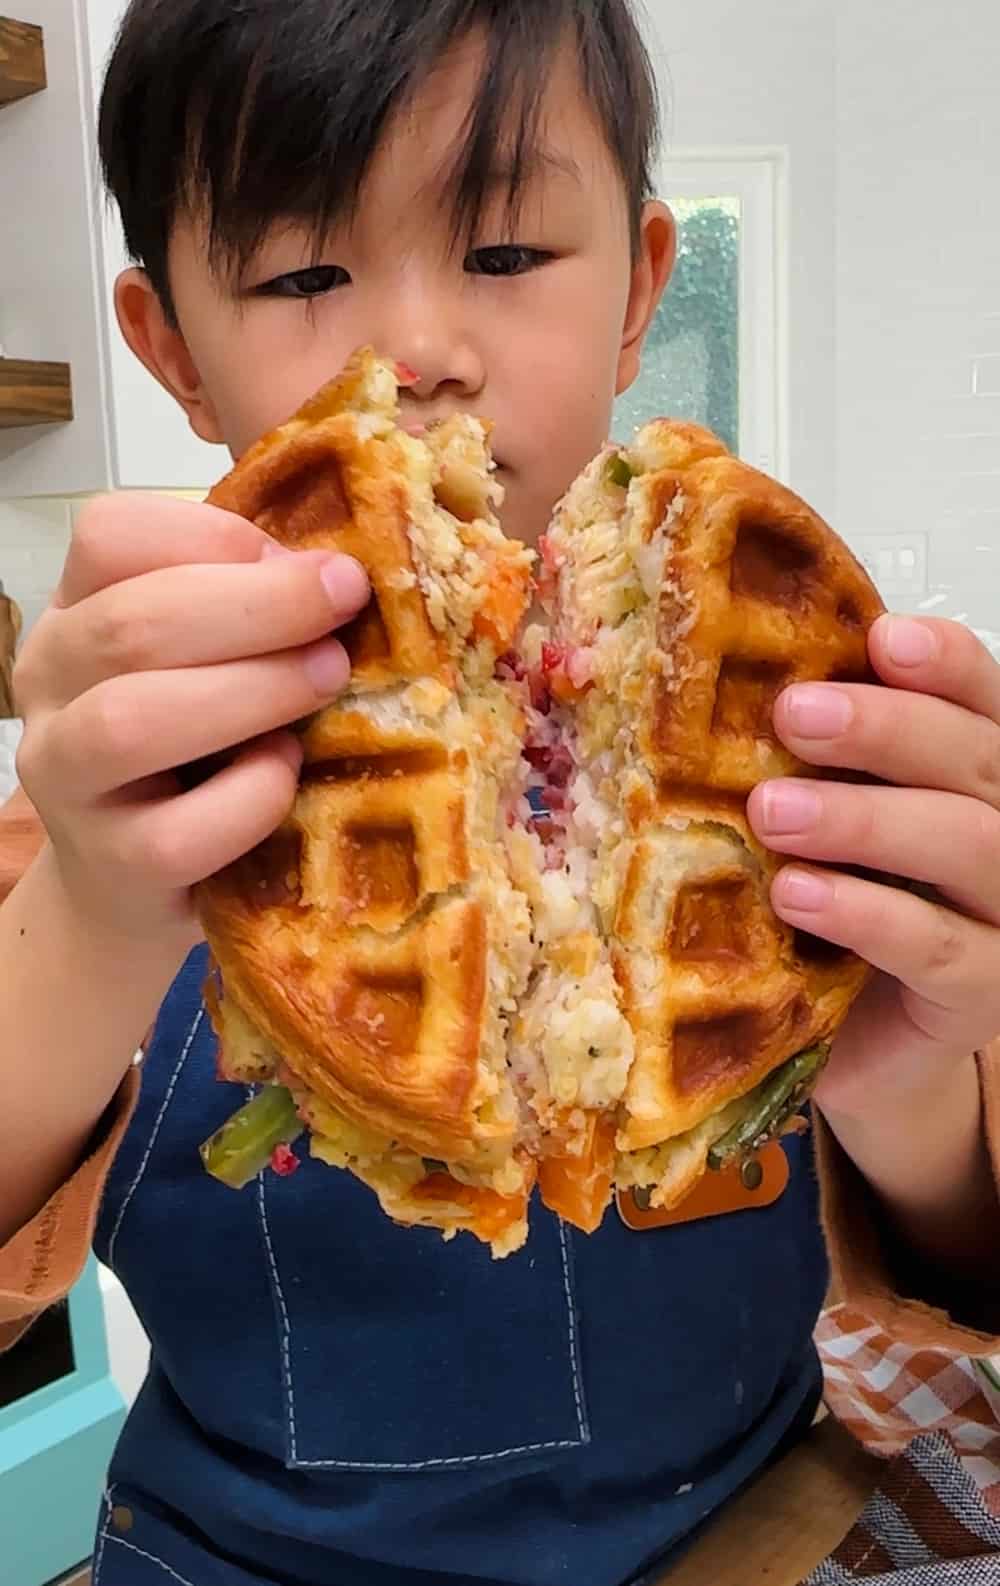 Get ready for thanksgiving with these super fun turkey waffles